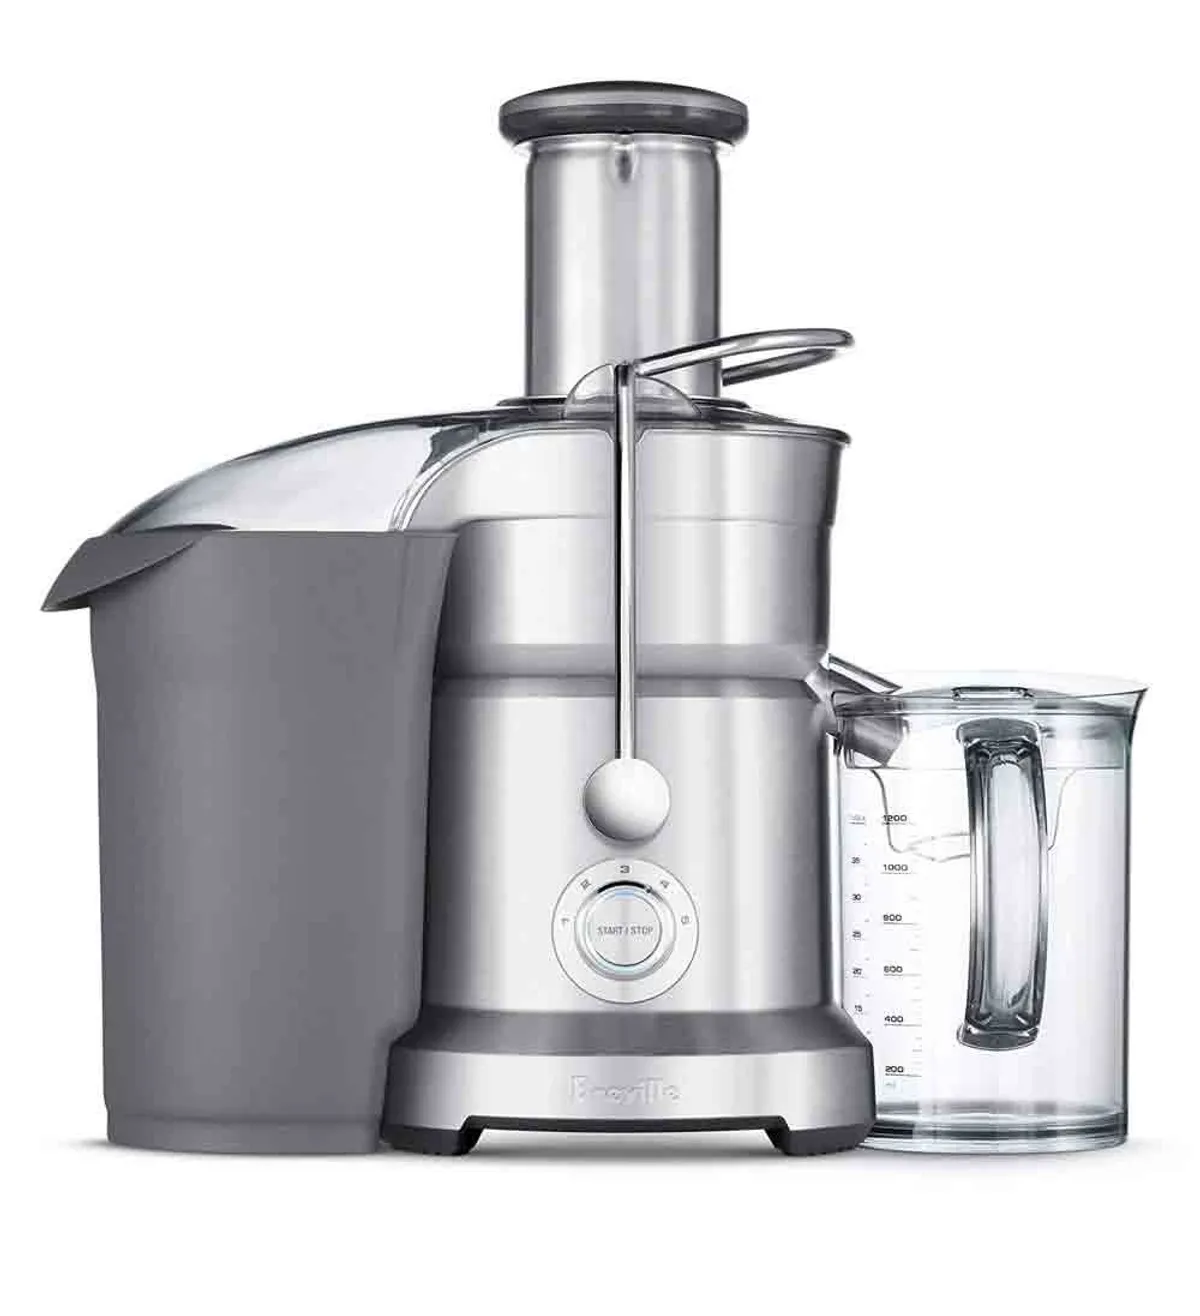 Breville BJE820XL Centrifugal Juicer Review